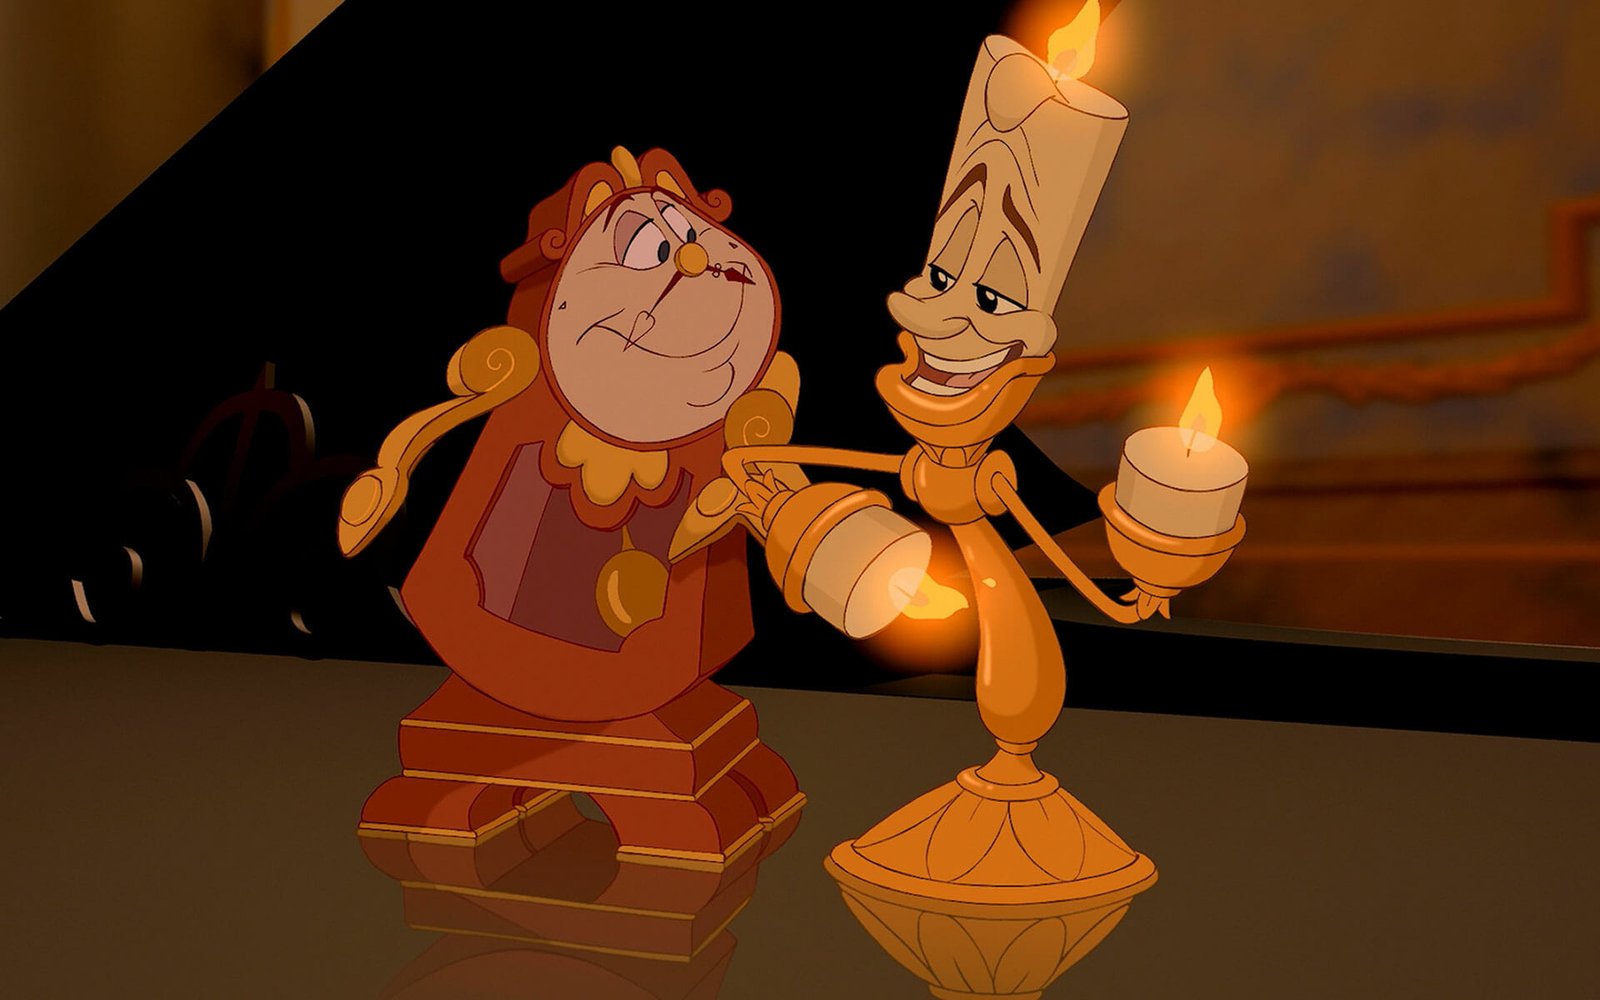 Lumiere and Cogsworth (beauty and the beast)